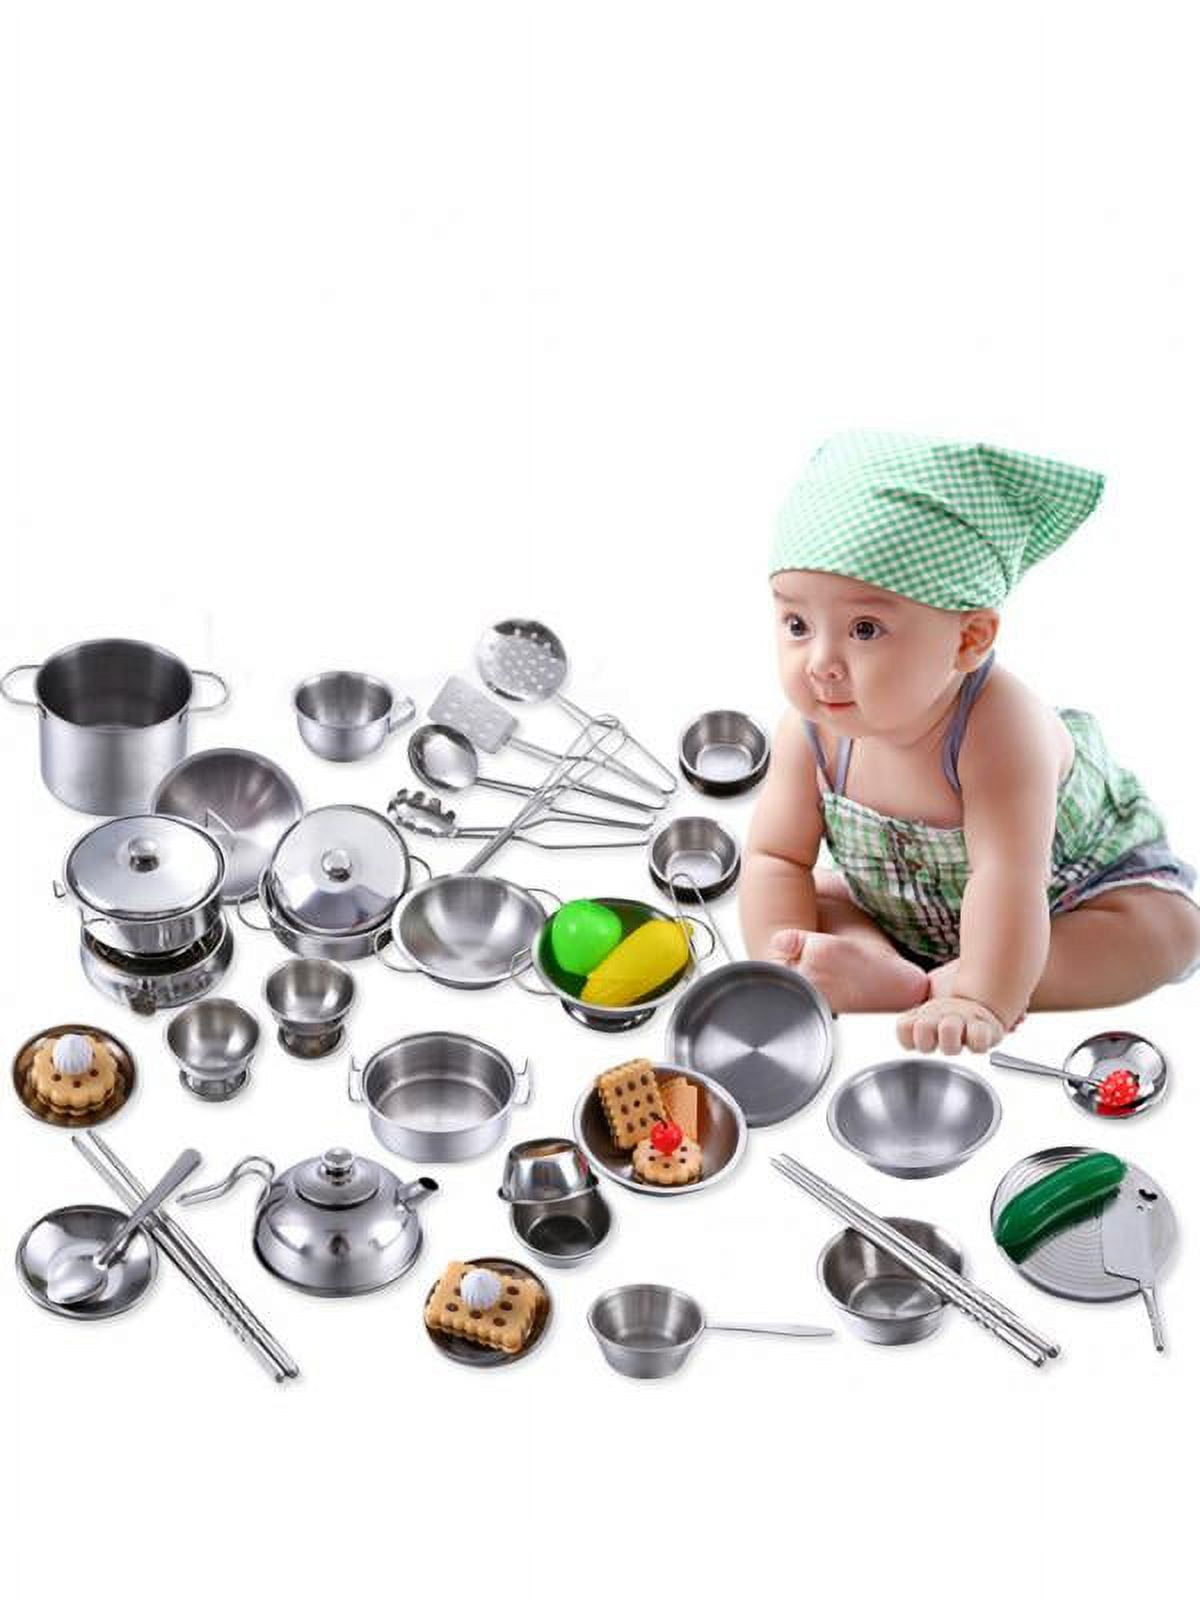 Fun Simulation Kitchen Toys Real Cooking Small Kitchen Utensils Kids  Cooking Interest Development Educational Puzzle Toys